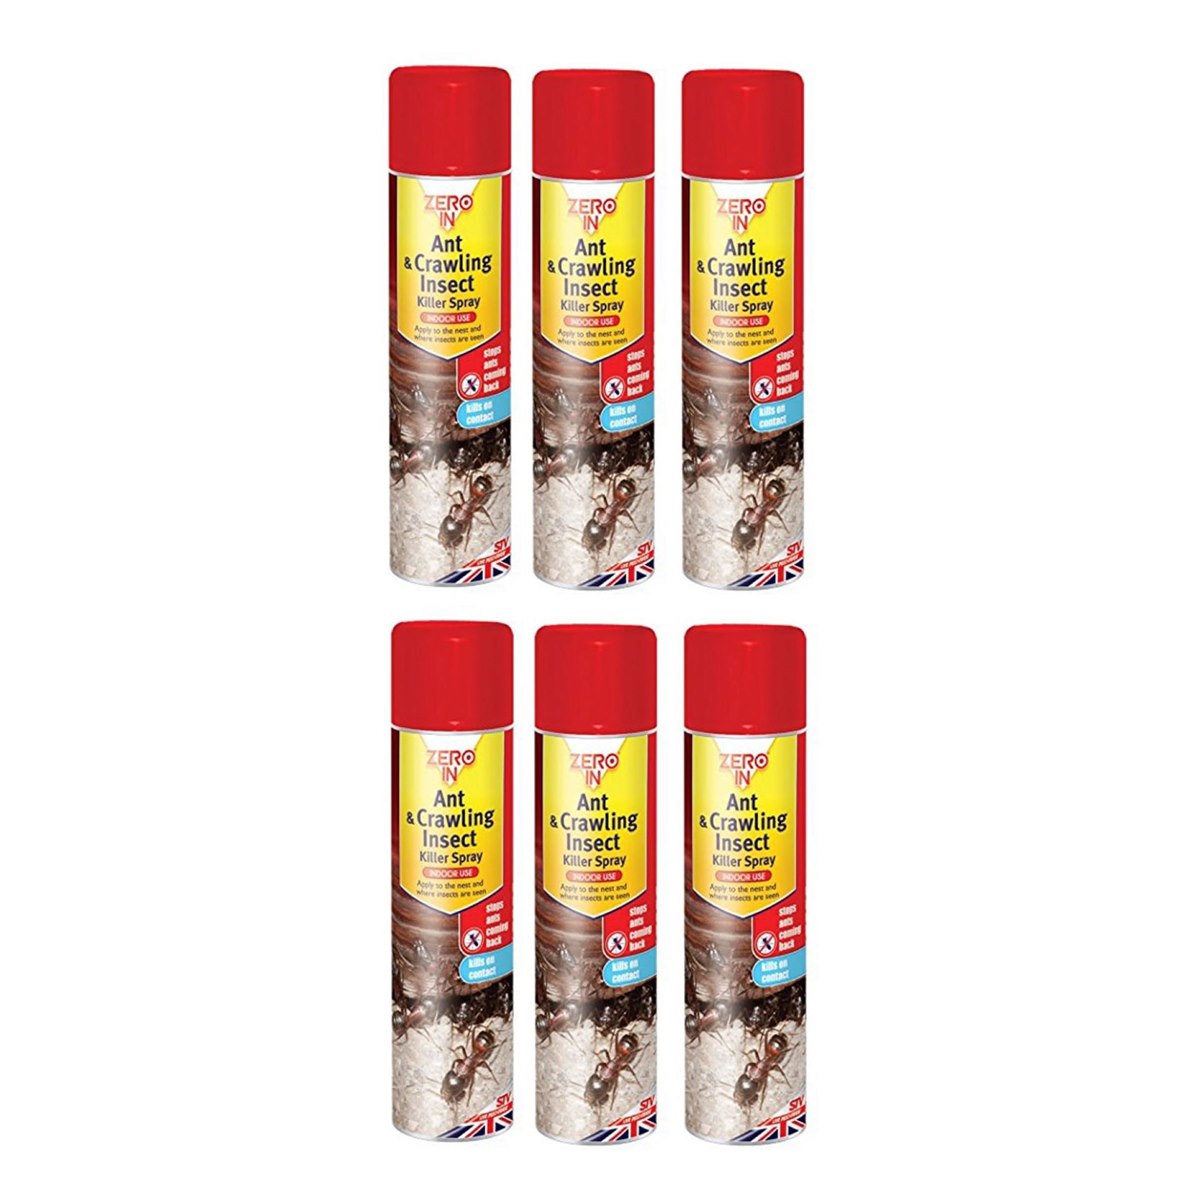 Case of 6 x Zero In Ant and Crawling Insect Killer Spray 300ml